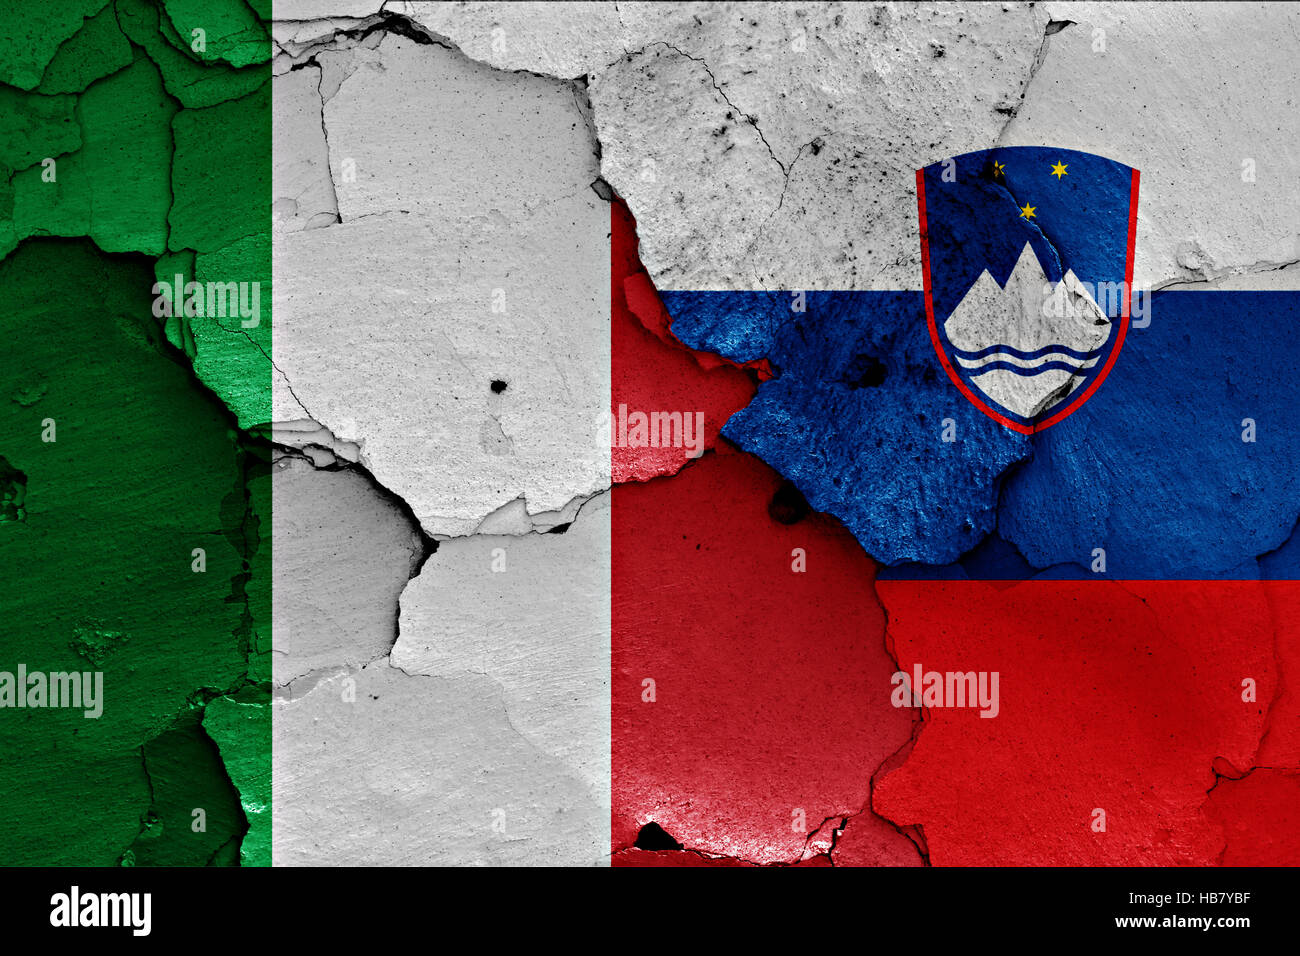 flags of Italy and Slovenia painted on cracked wall Stock Photo